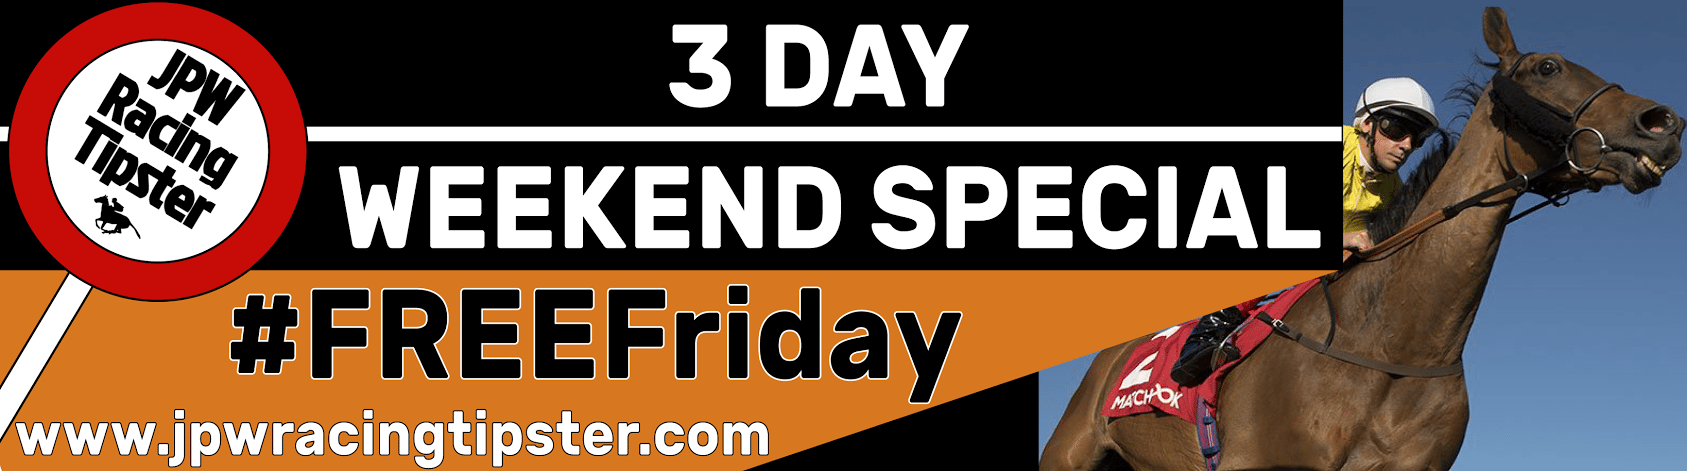 3 Day Weekend Special